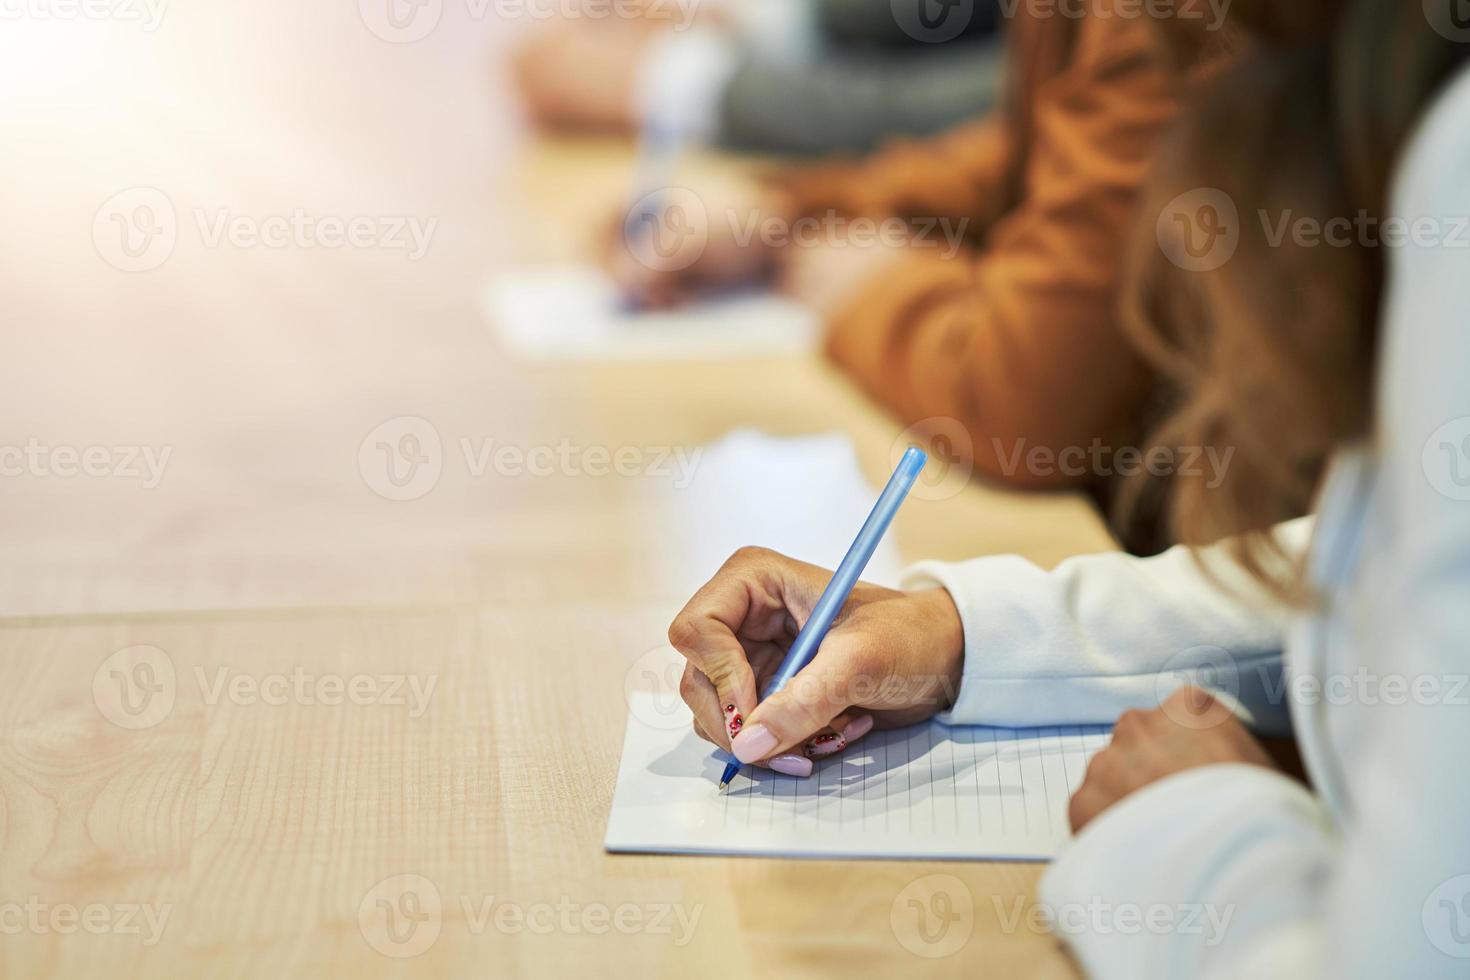 Picture of a human hand writing something on the paper on the foreground photo